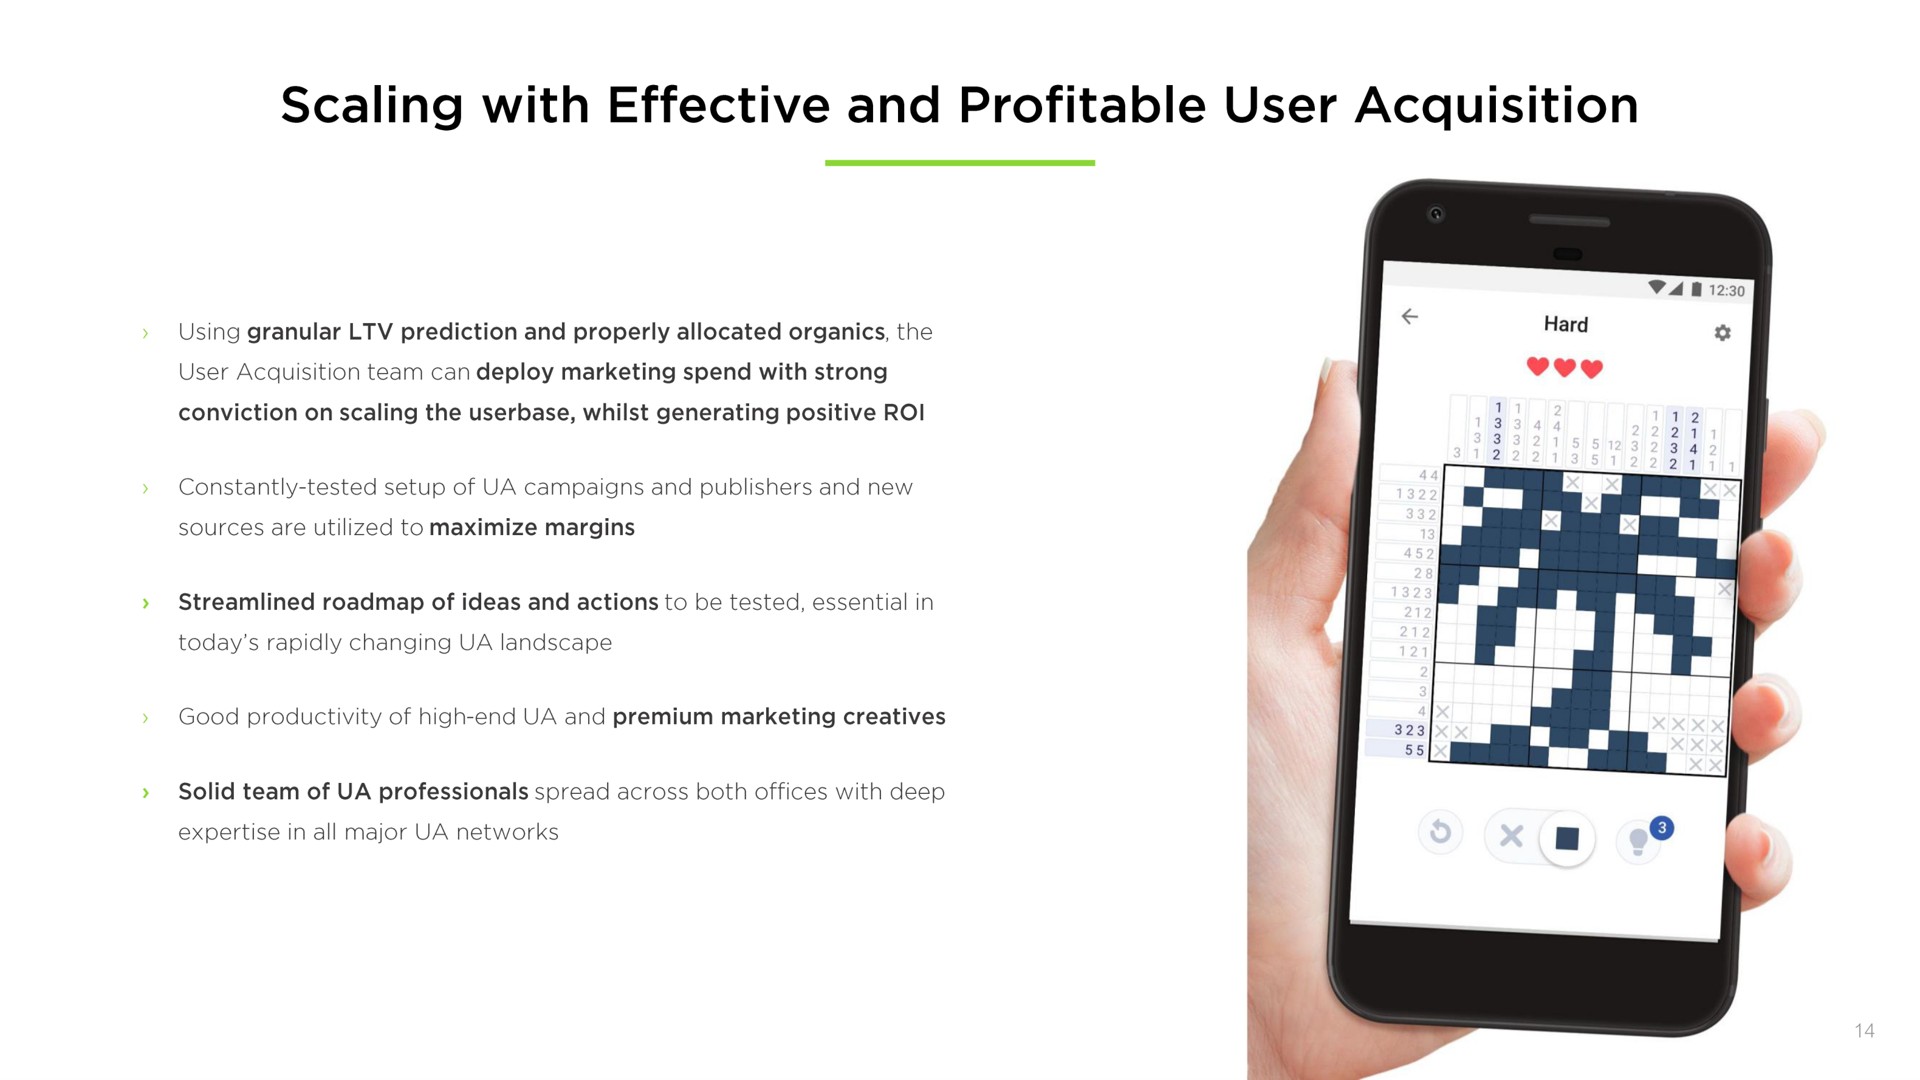 scaling with effective and profitable user acquisition | Embracer Group